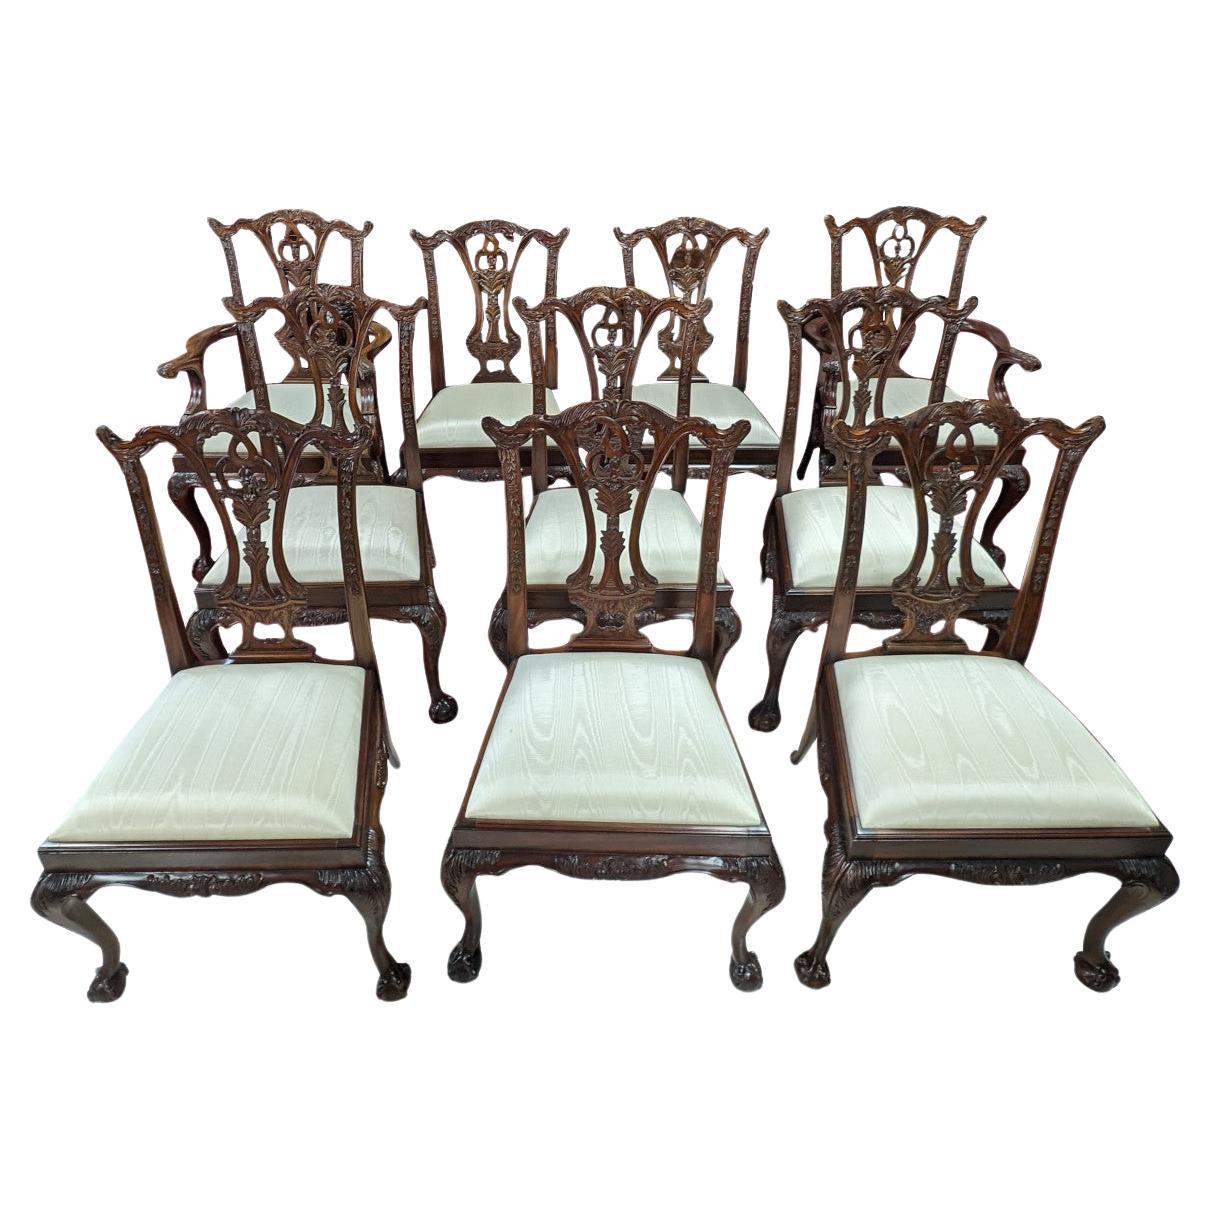 10 Maitland Smith “Philadelphia” Chippendale Style Dining Chairs